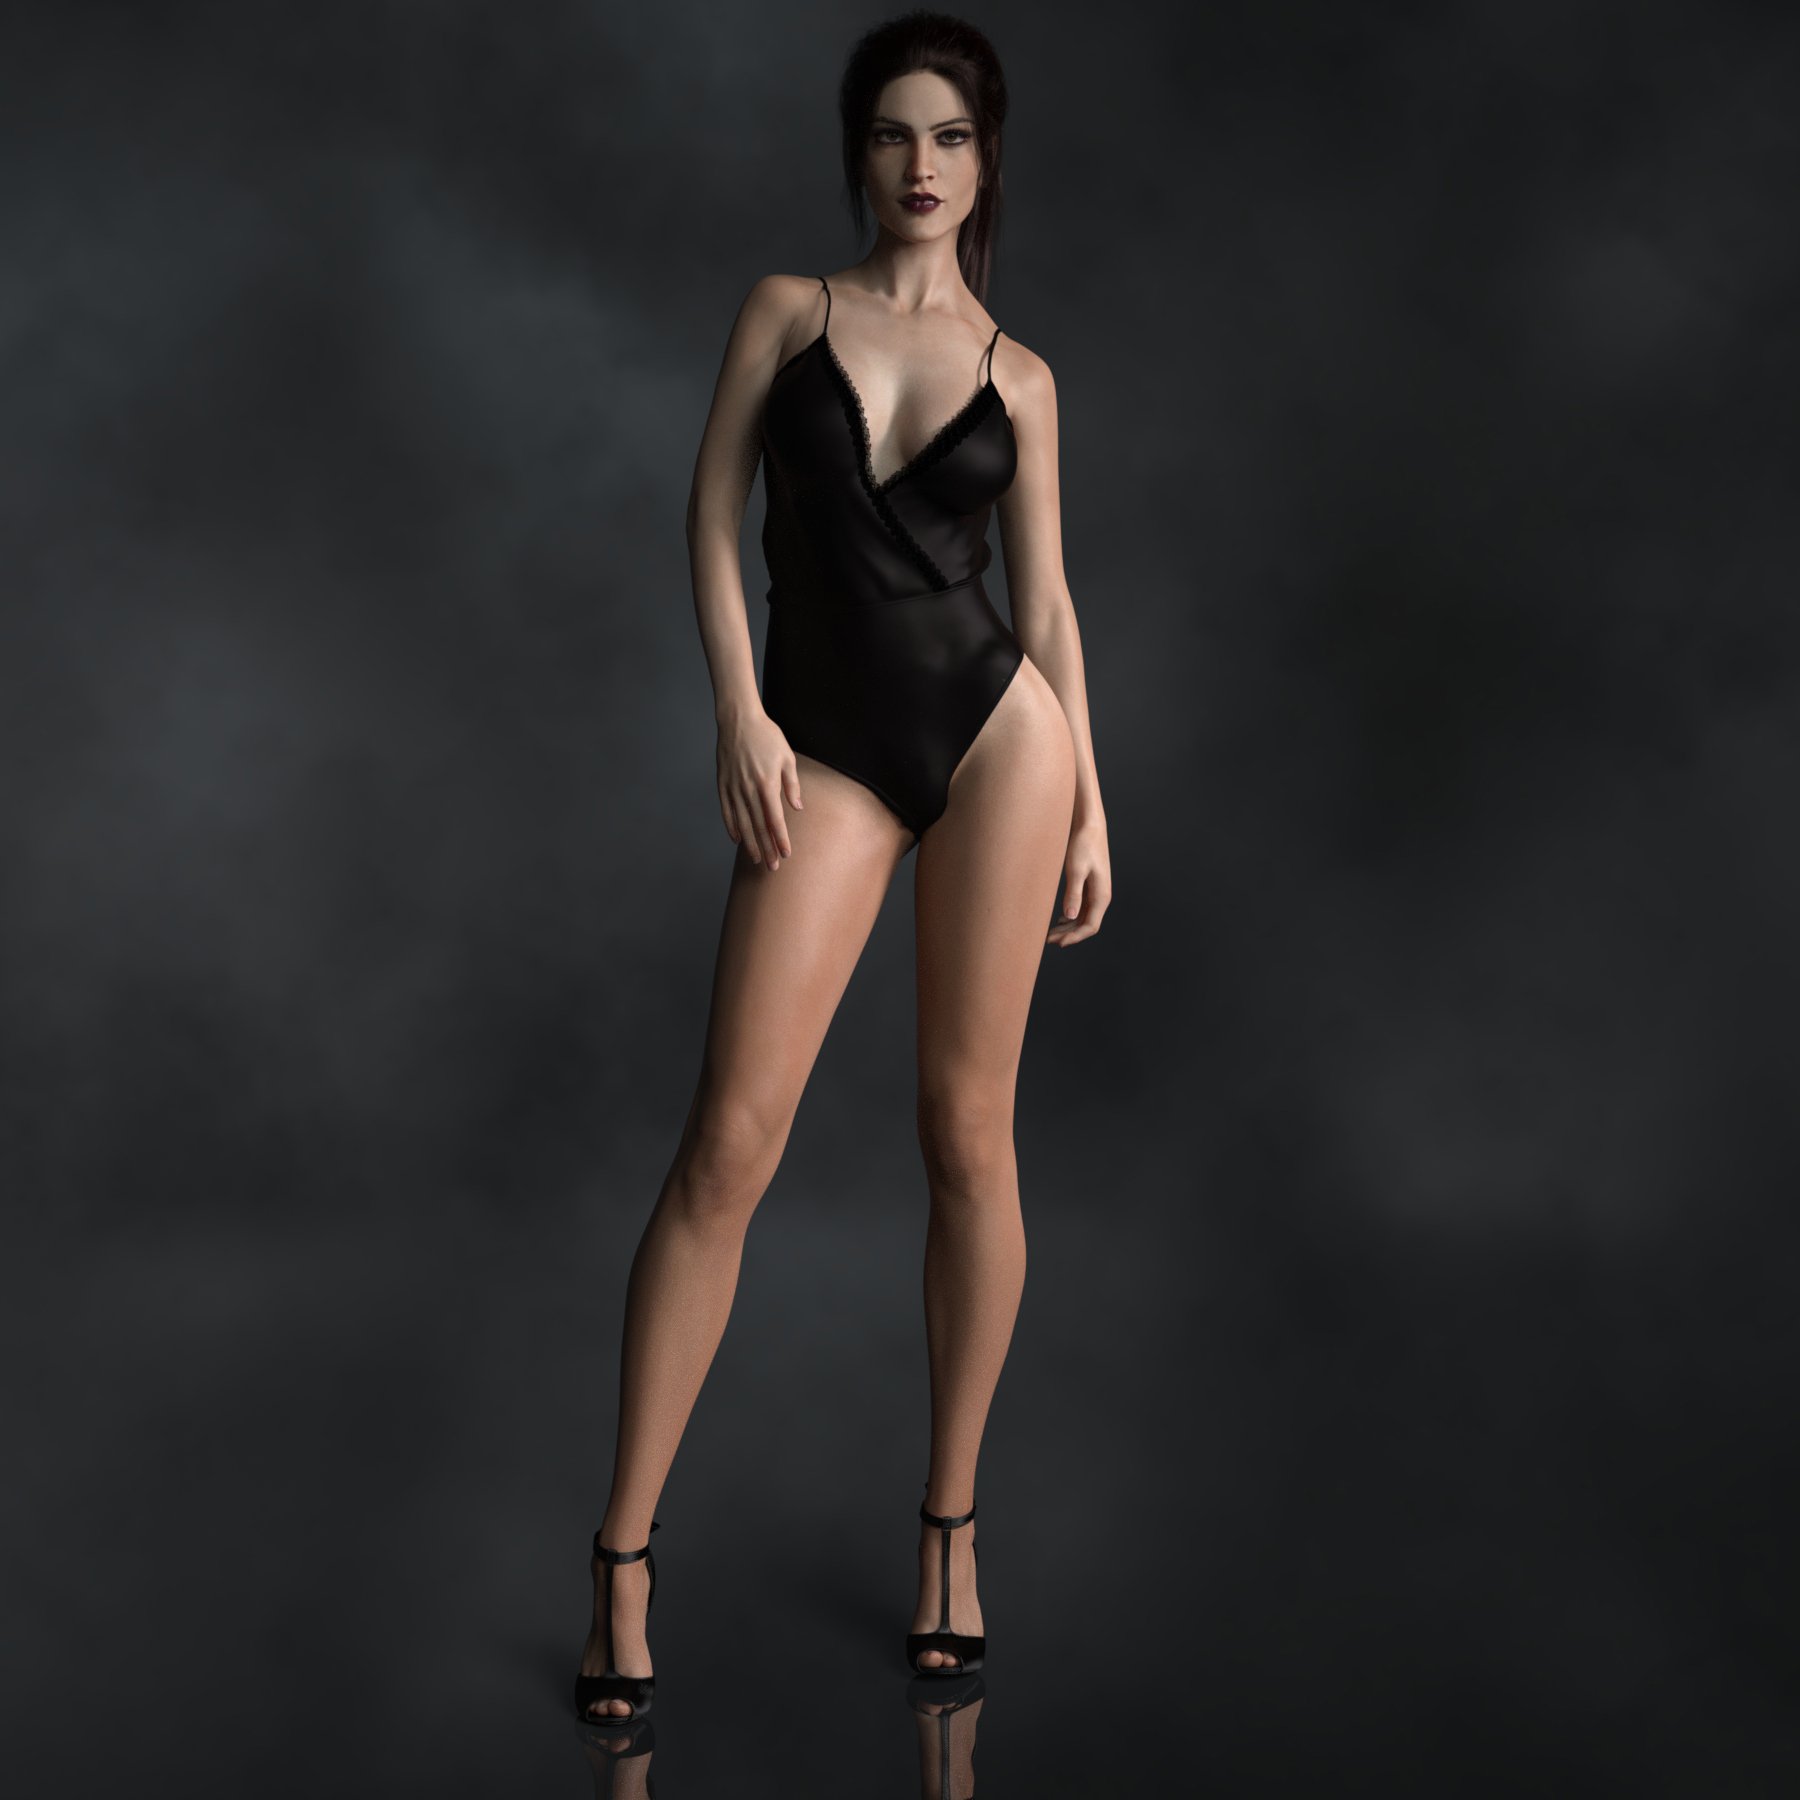 Constance for Tasha 8 by: SR3, 3D Models by Daz 3D